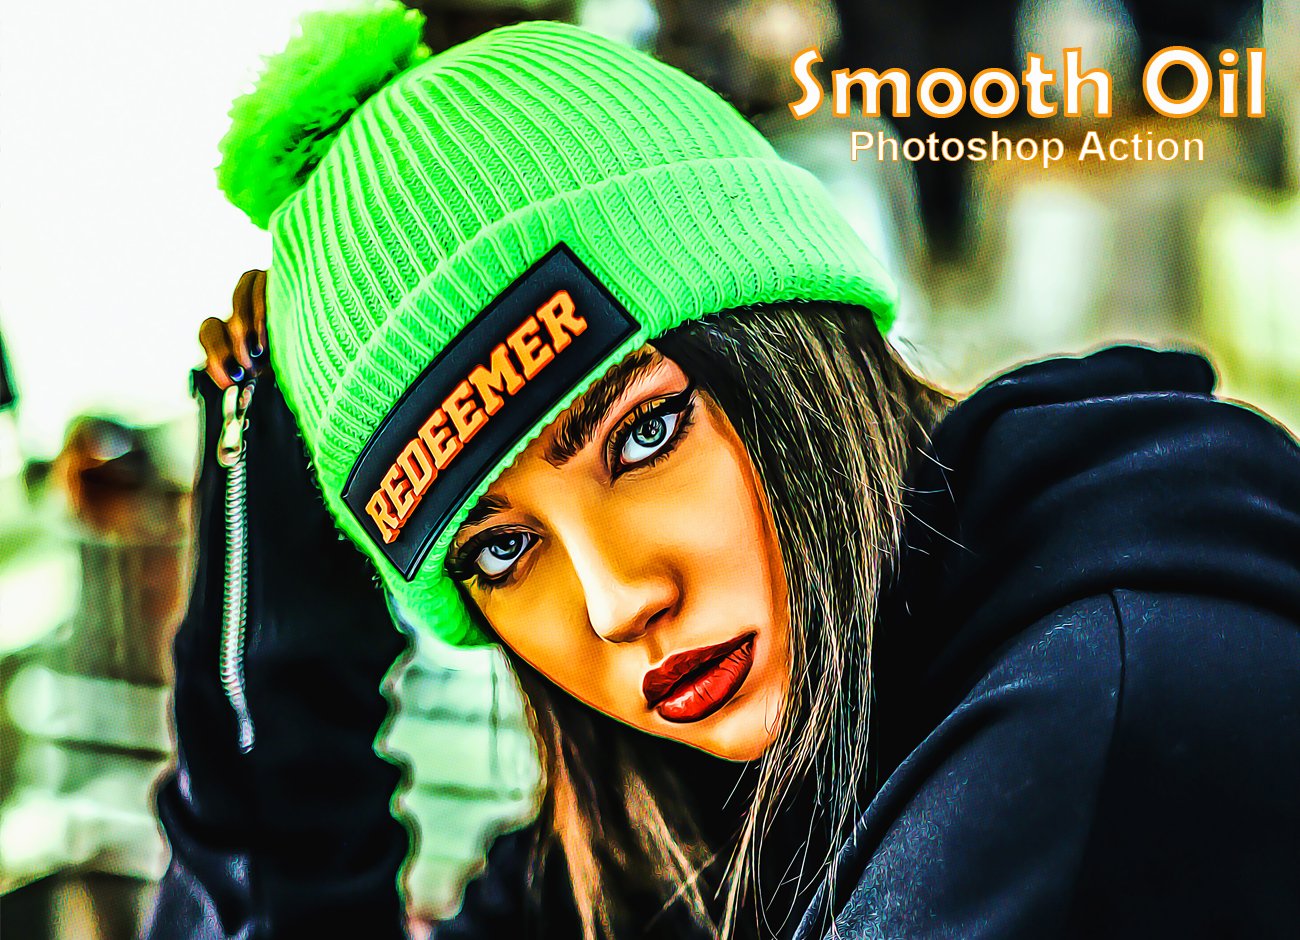 Smooth Oil Photoshop Actioncover image.